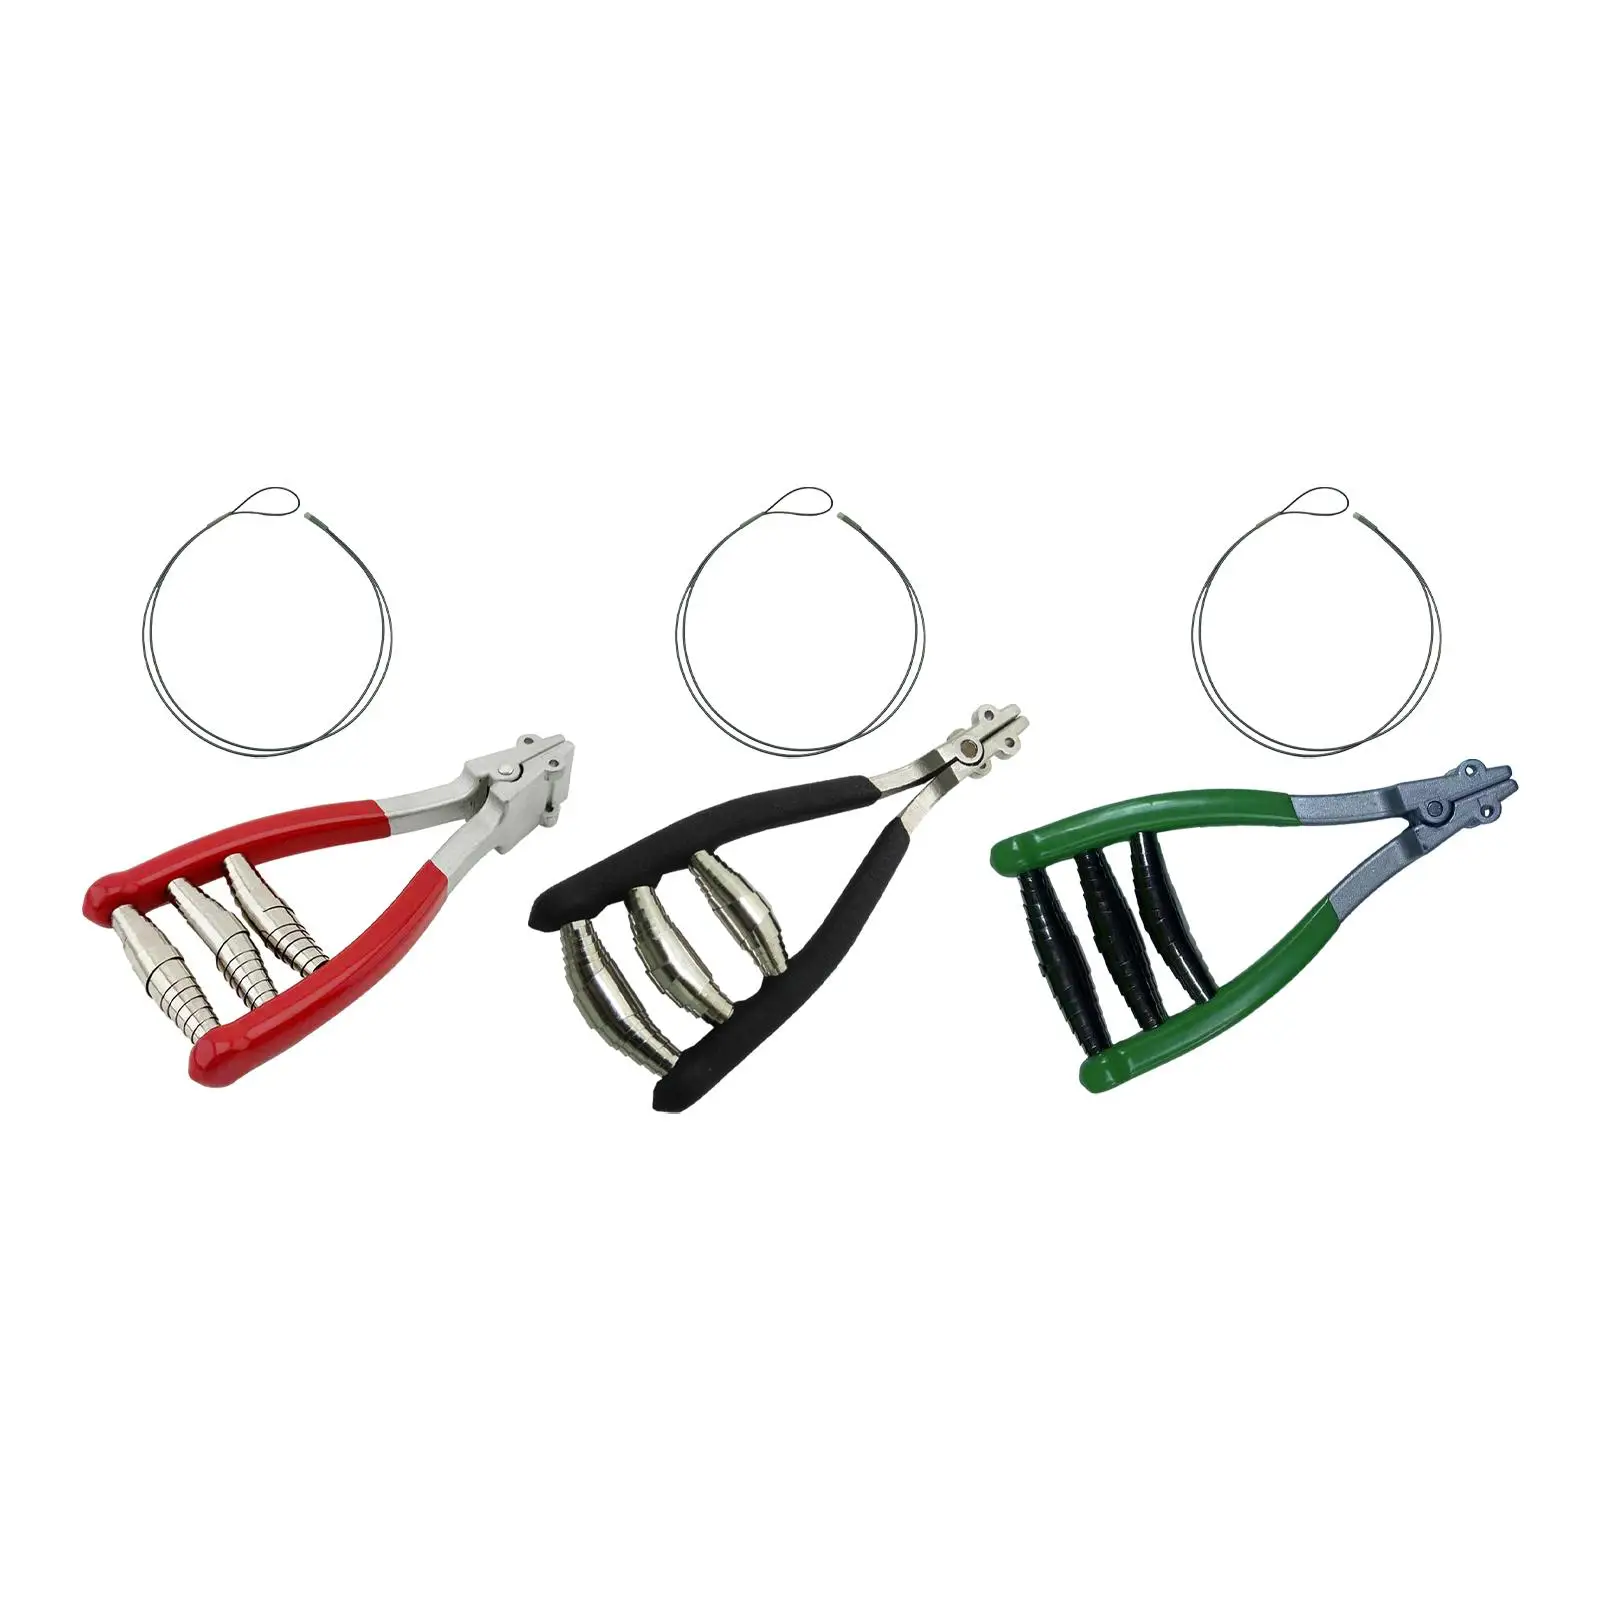 String Starting Clamp Stringing Clamp 3 Spring Starter Clamp Tennis Equipment for Squash Badminton Tennis Racquet Accessories